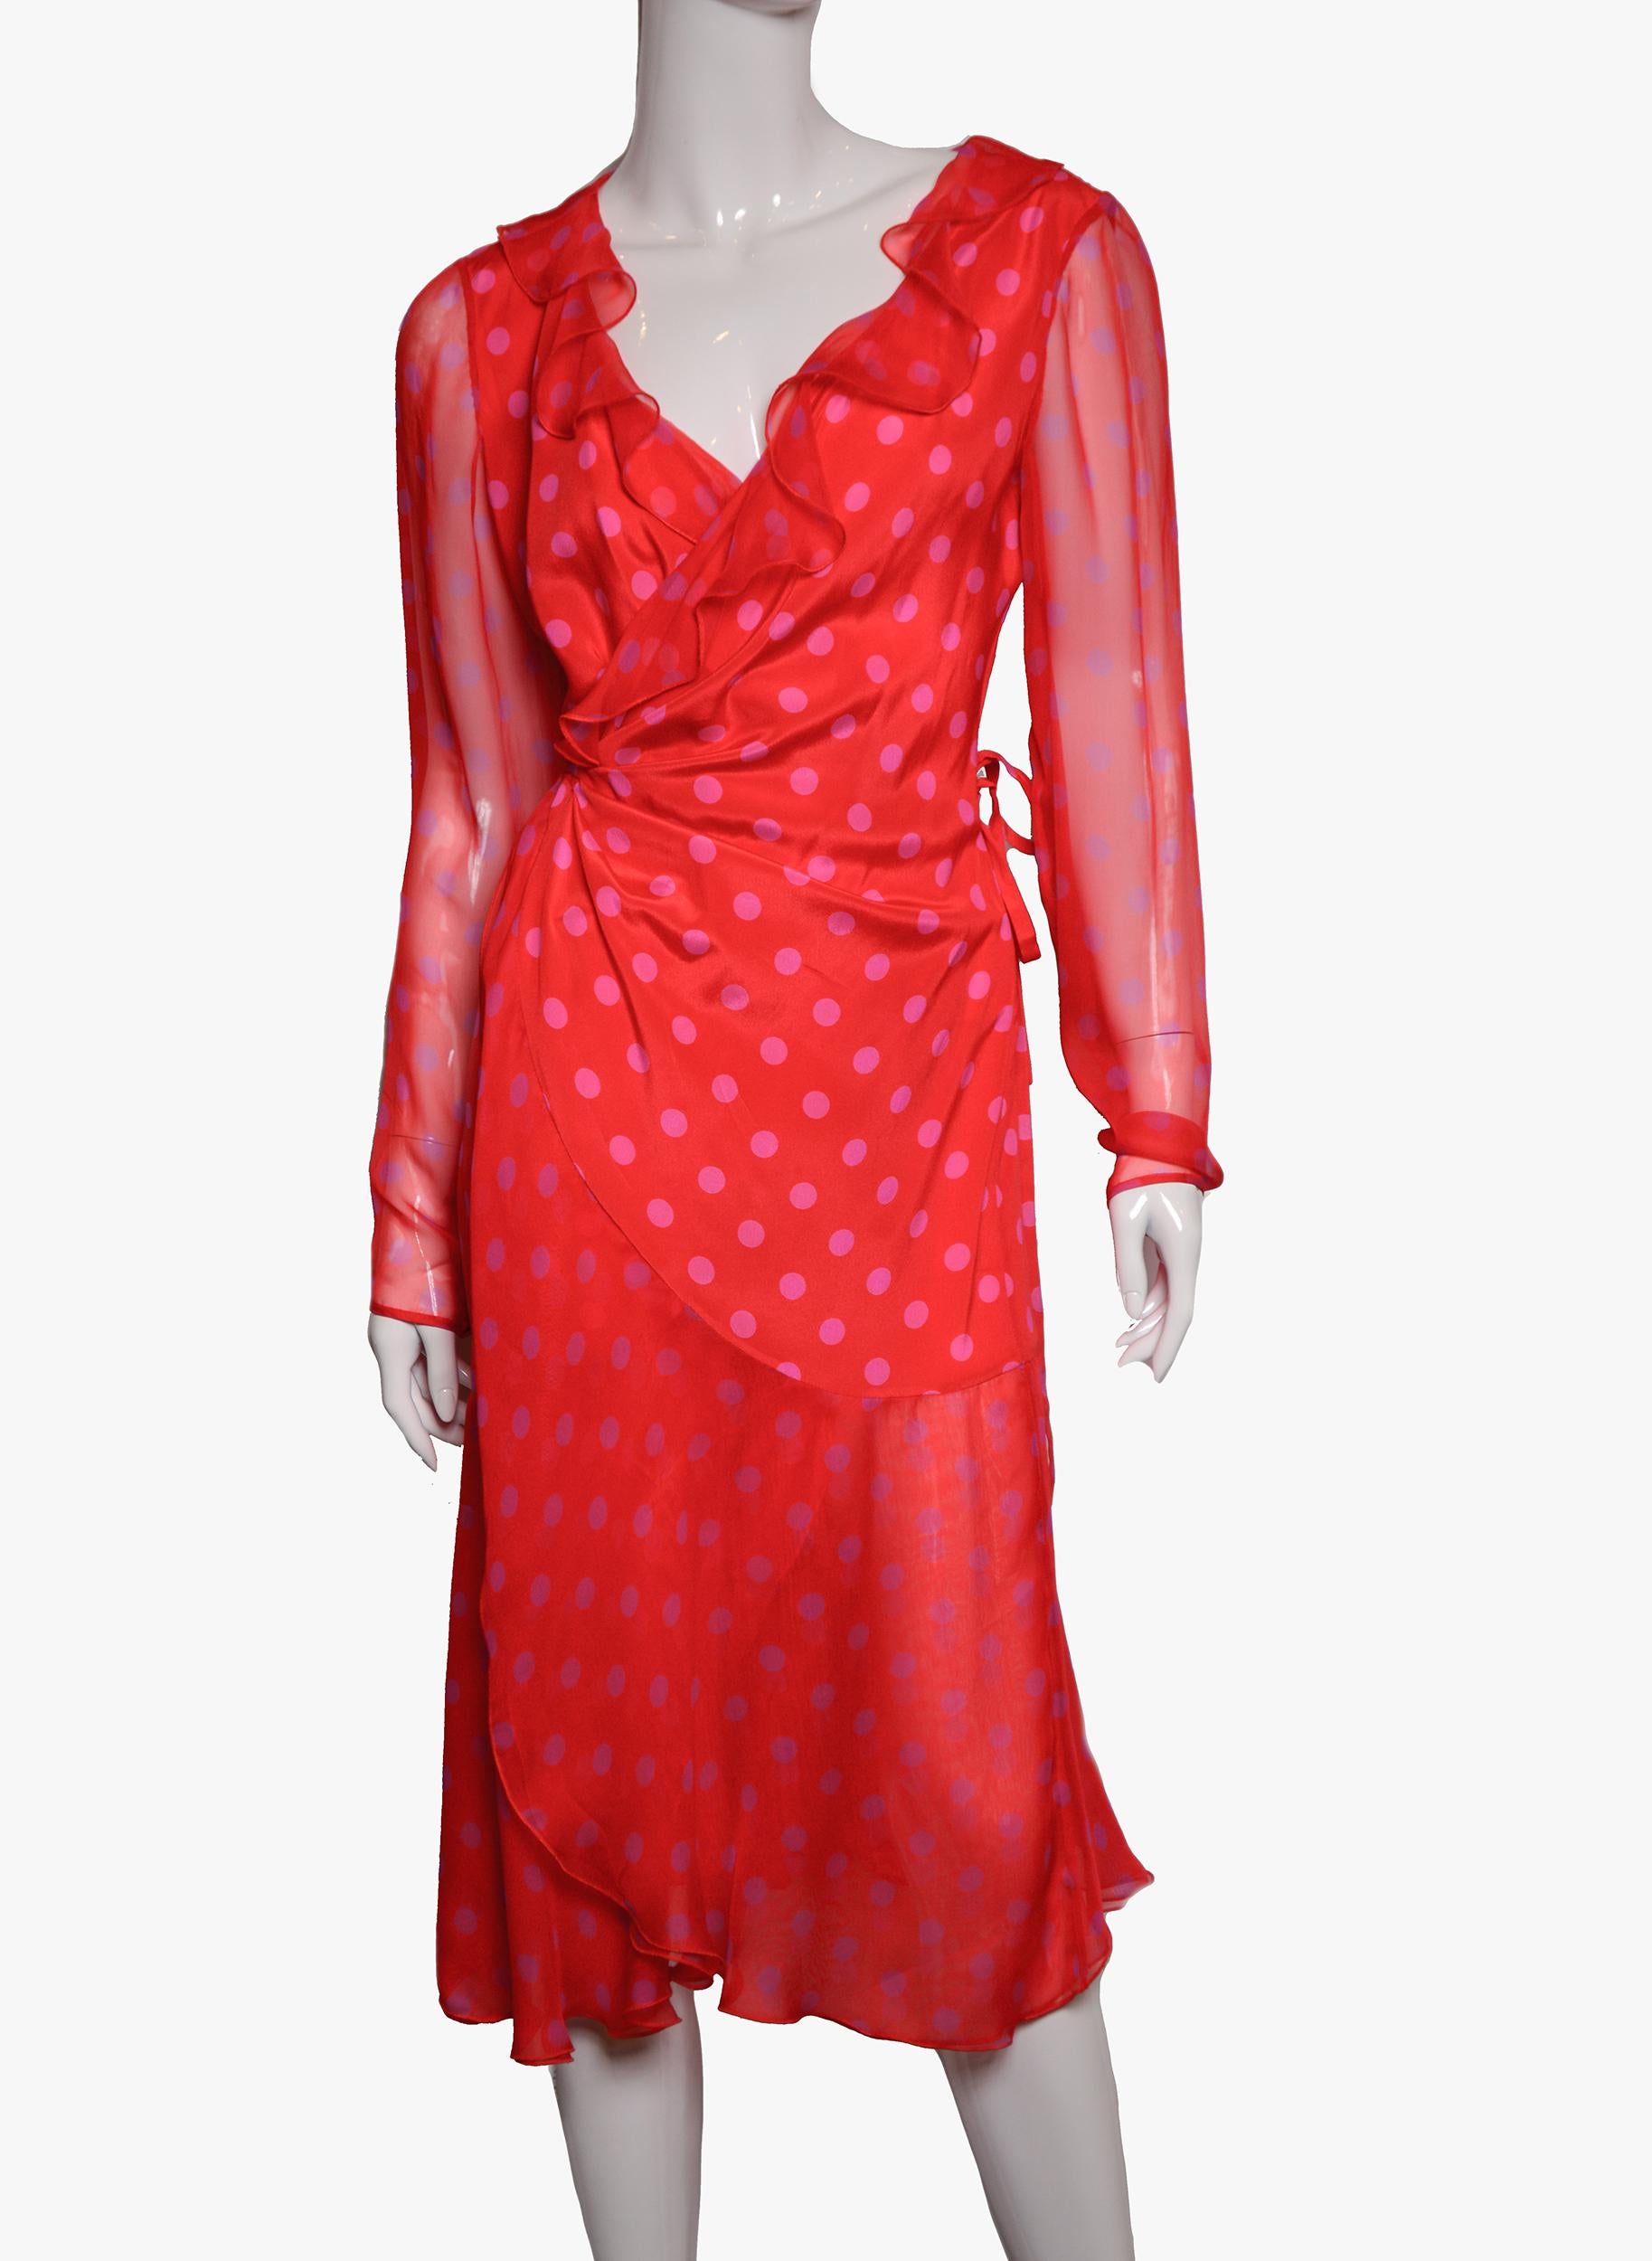 Vintage Emanuel Ungaro dress made from light, flowing silk.
Fastens with a wrap.
Color – red with a carrot tint.
Composition: 100% silk
Size: S/36
Measurements:
Sleeve length: 62 cm / 24”
Length: 108 cm / 42.5”
Condition: very good.